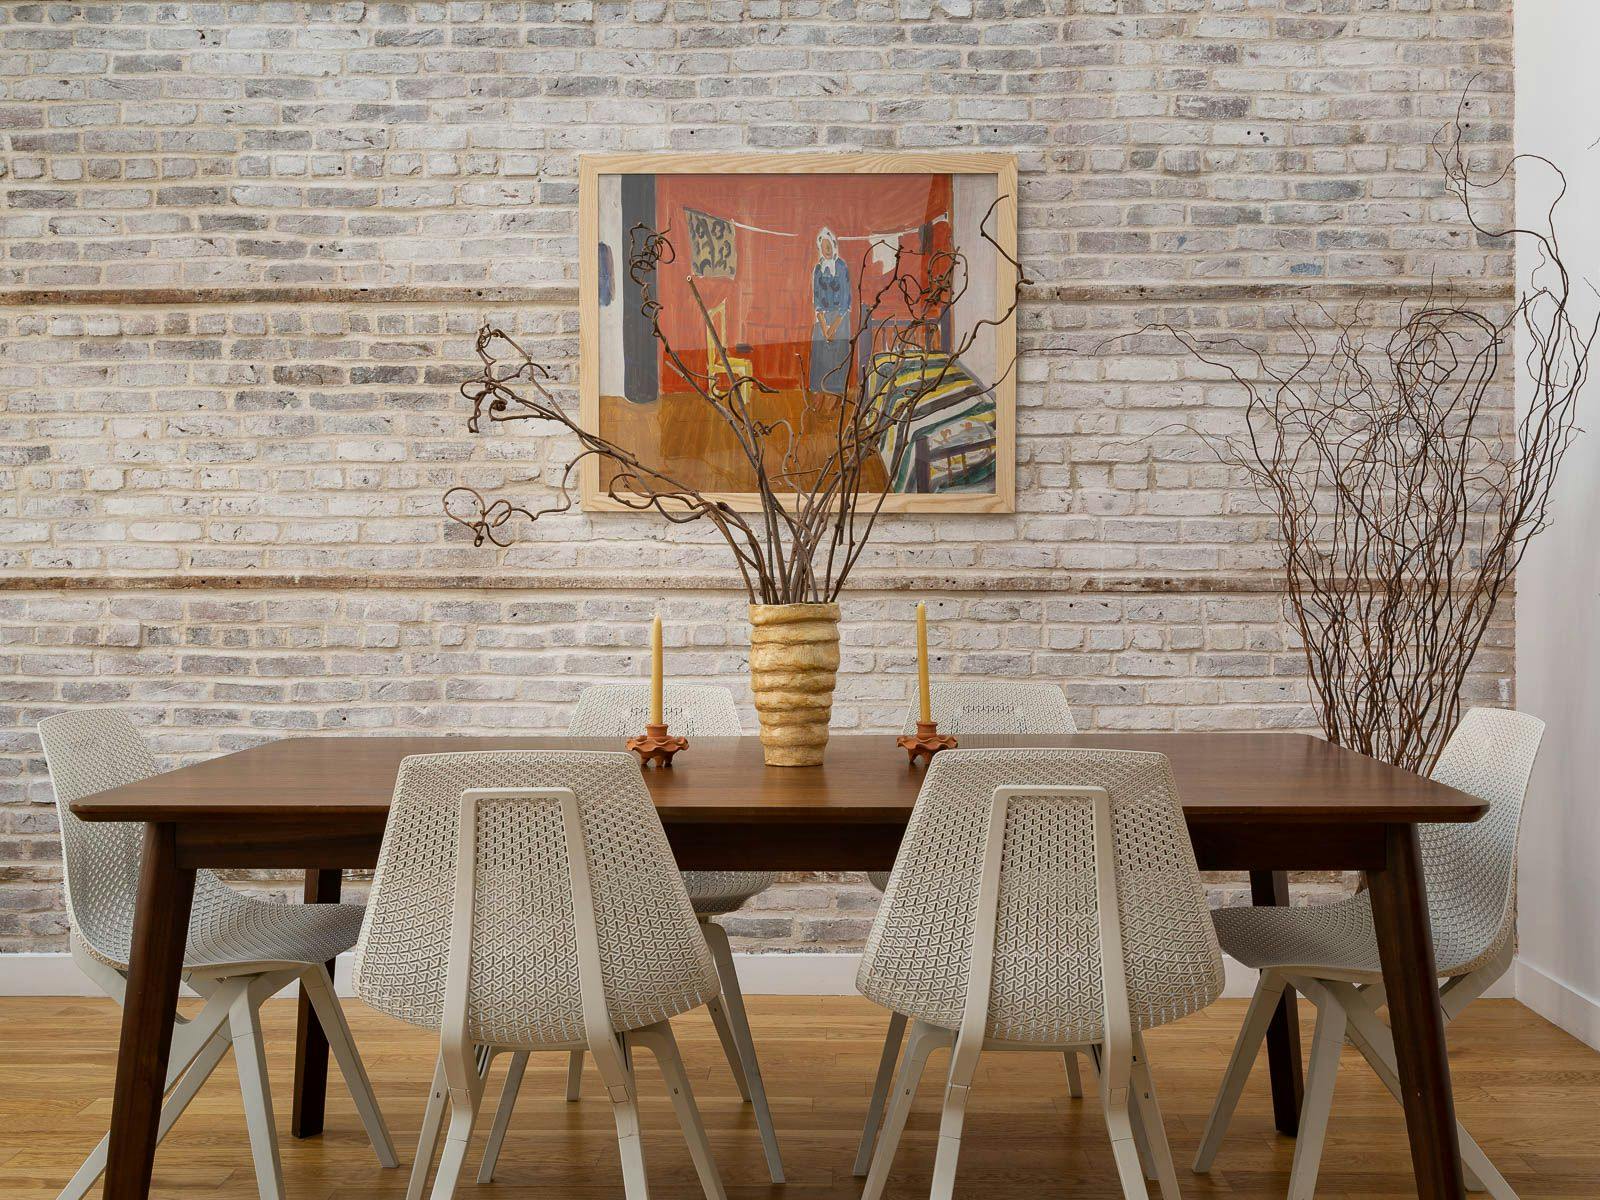 Modern Dining Room with Brick Wall, white chairs, wooden mid-century modern table with decor